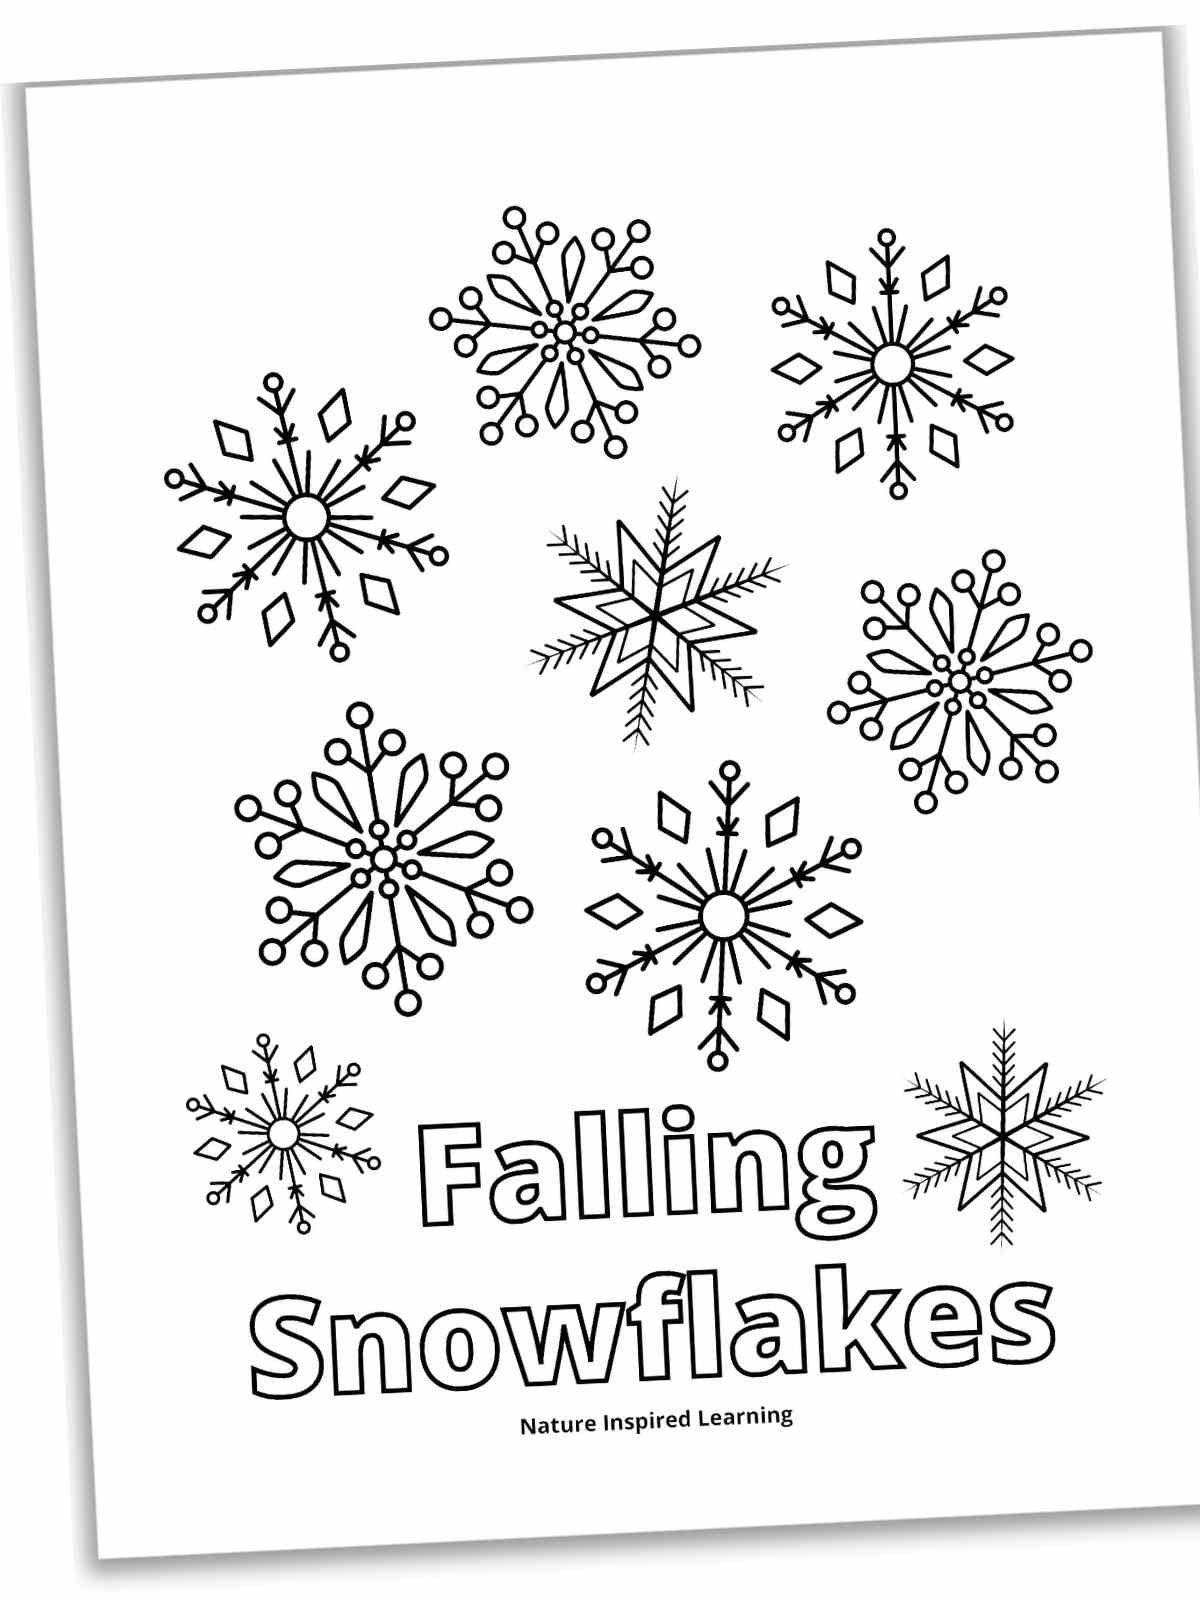 Black and white printable with a collection of falling snowflakes with different designs. The words Falling Snowflakes across the bottom in outline form.